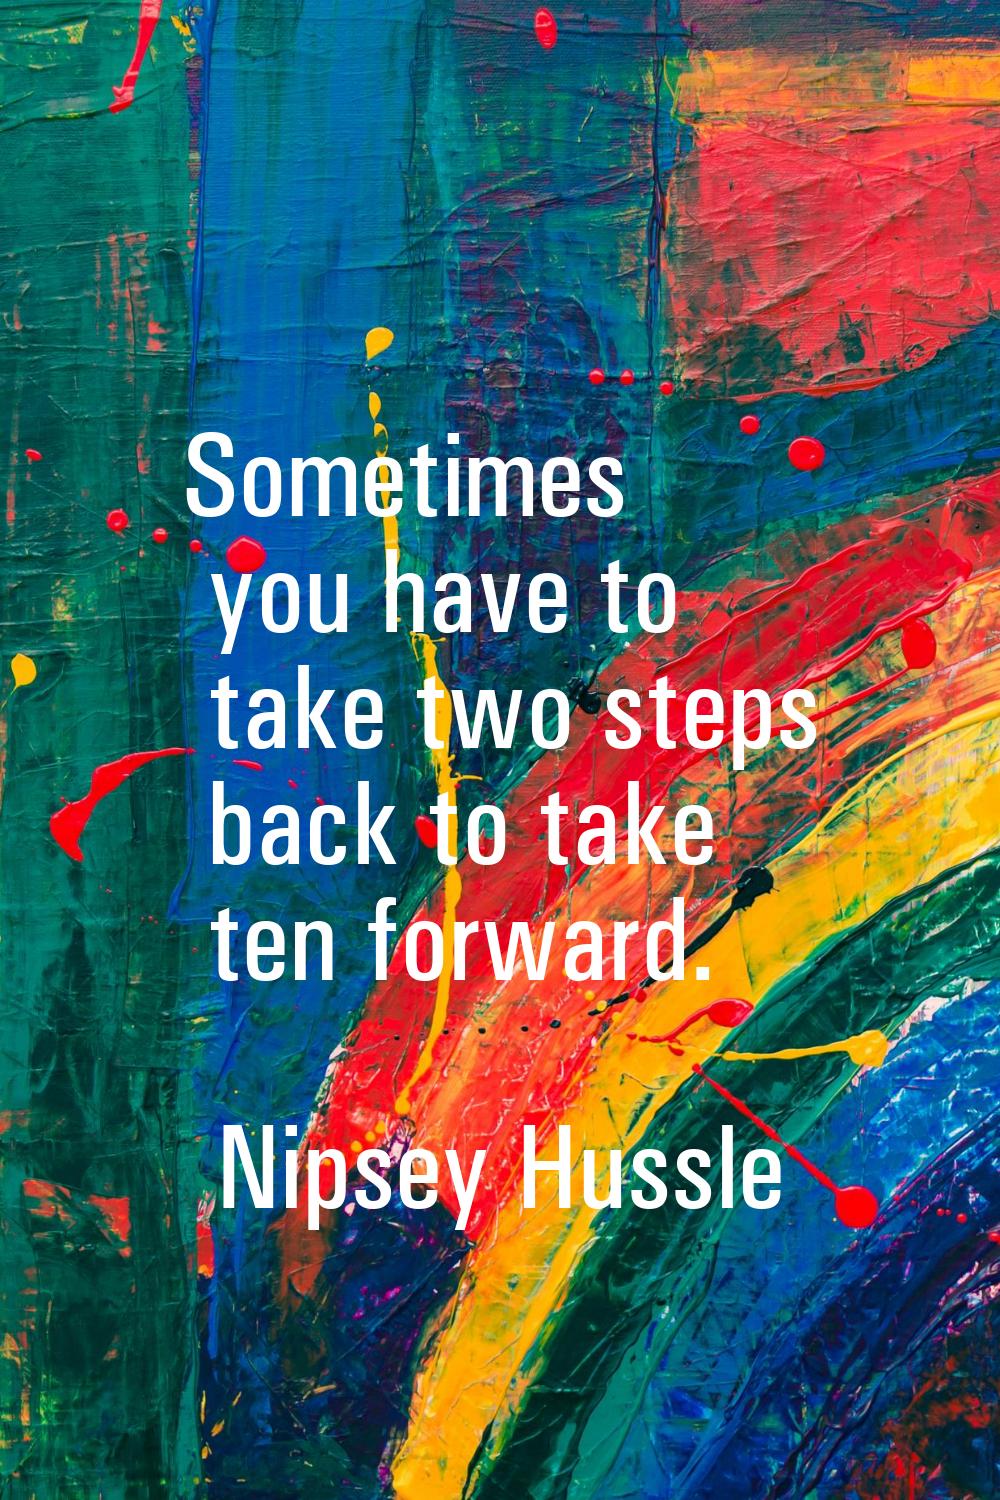 Sometimes you have to take two steps back to take ten forward.